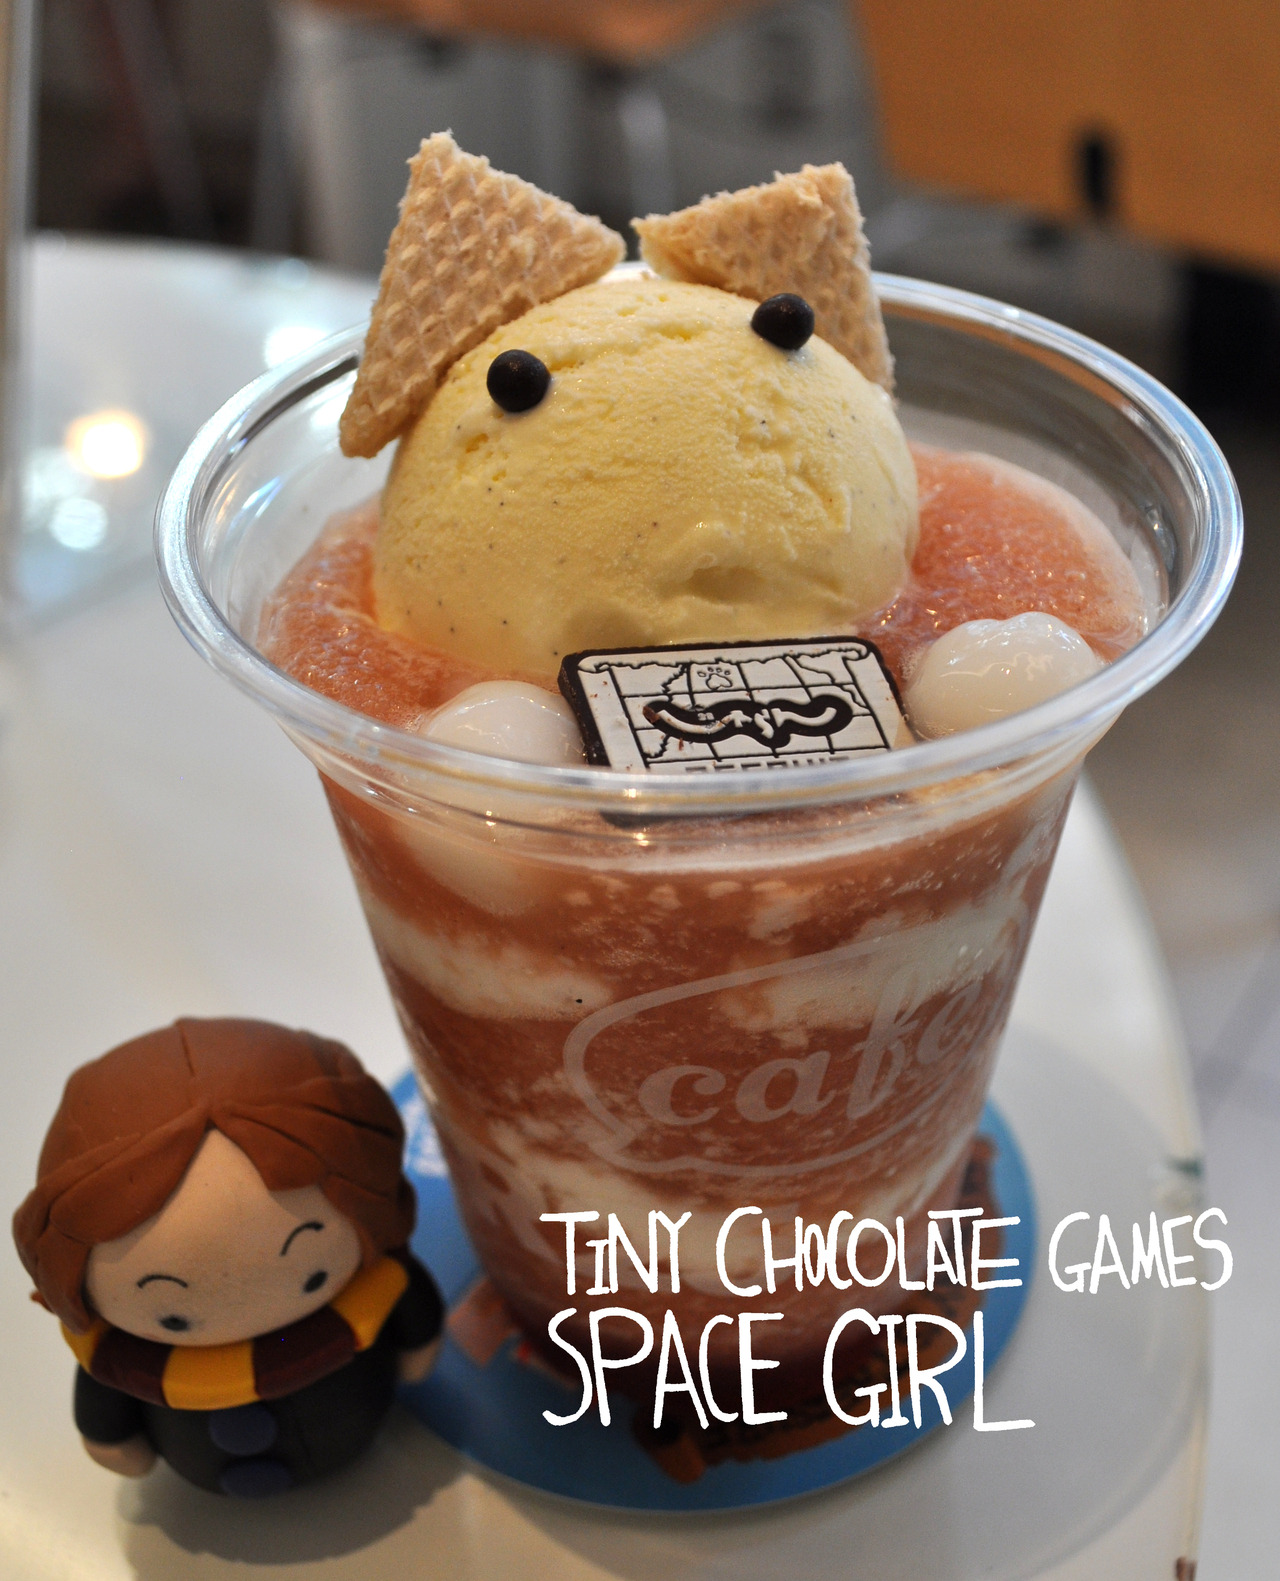 Is Space Girl in Japan? Yes, she is! Space Girl had some cat shaped ice cream at a cat pirate themed cafe in Ginza!
Click on the link to read reviews of the Space Girl iPhone game! :) http://itunes.apple.com/app/space-girl/id523548069